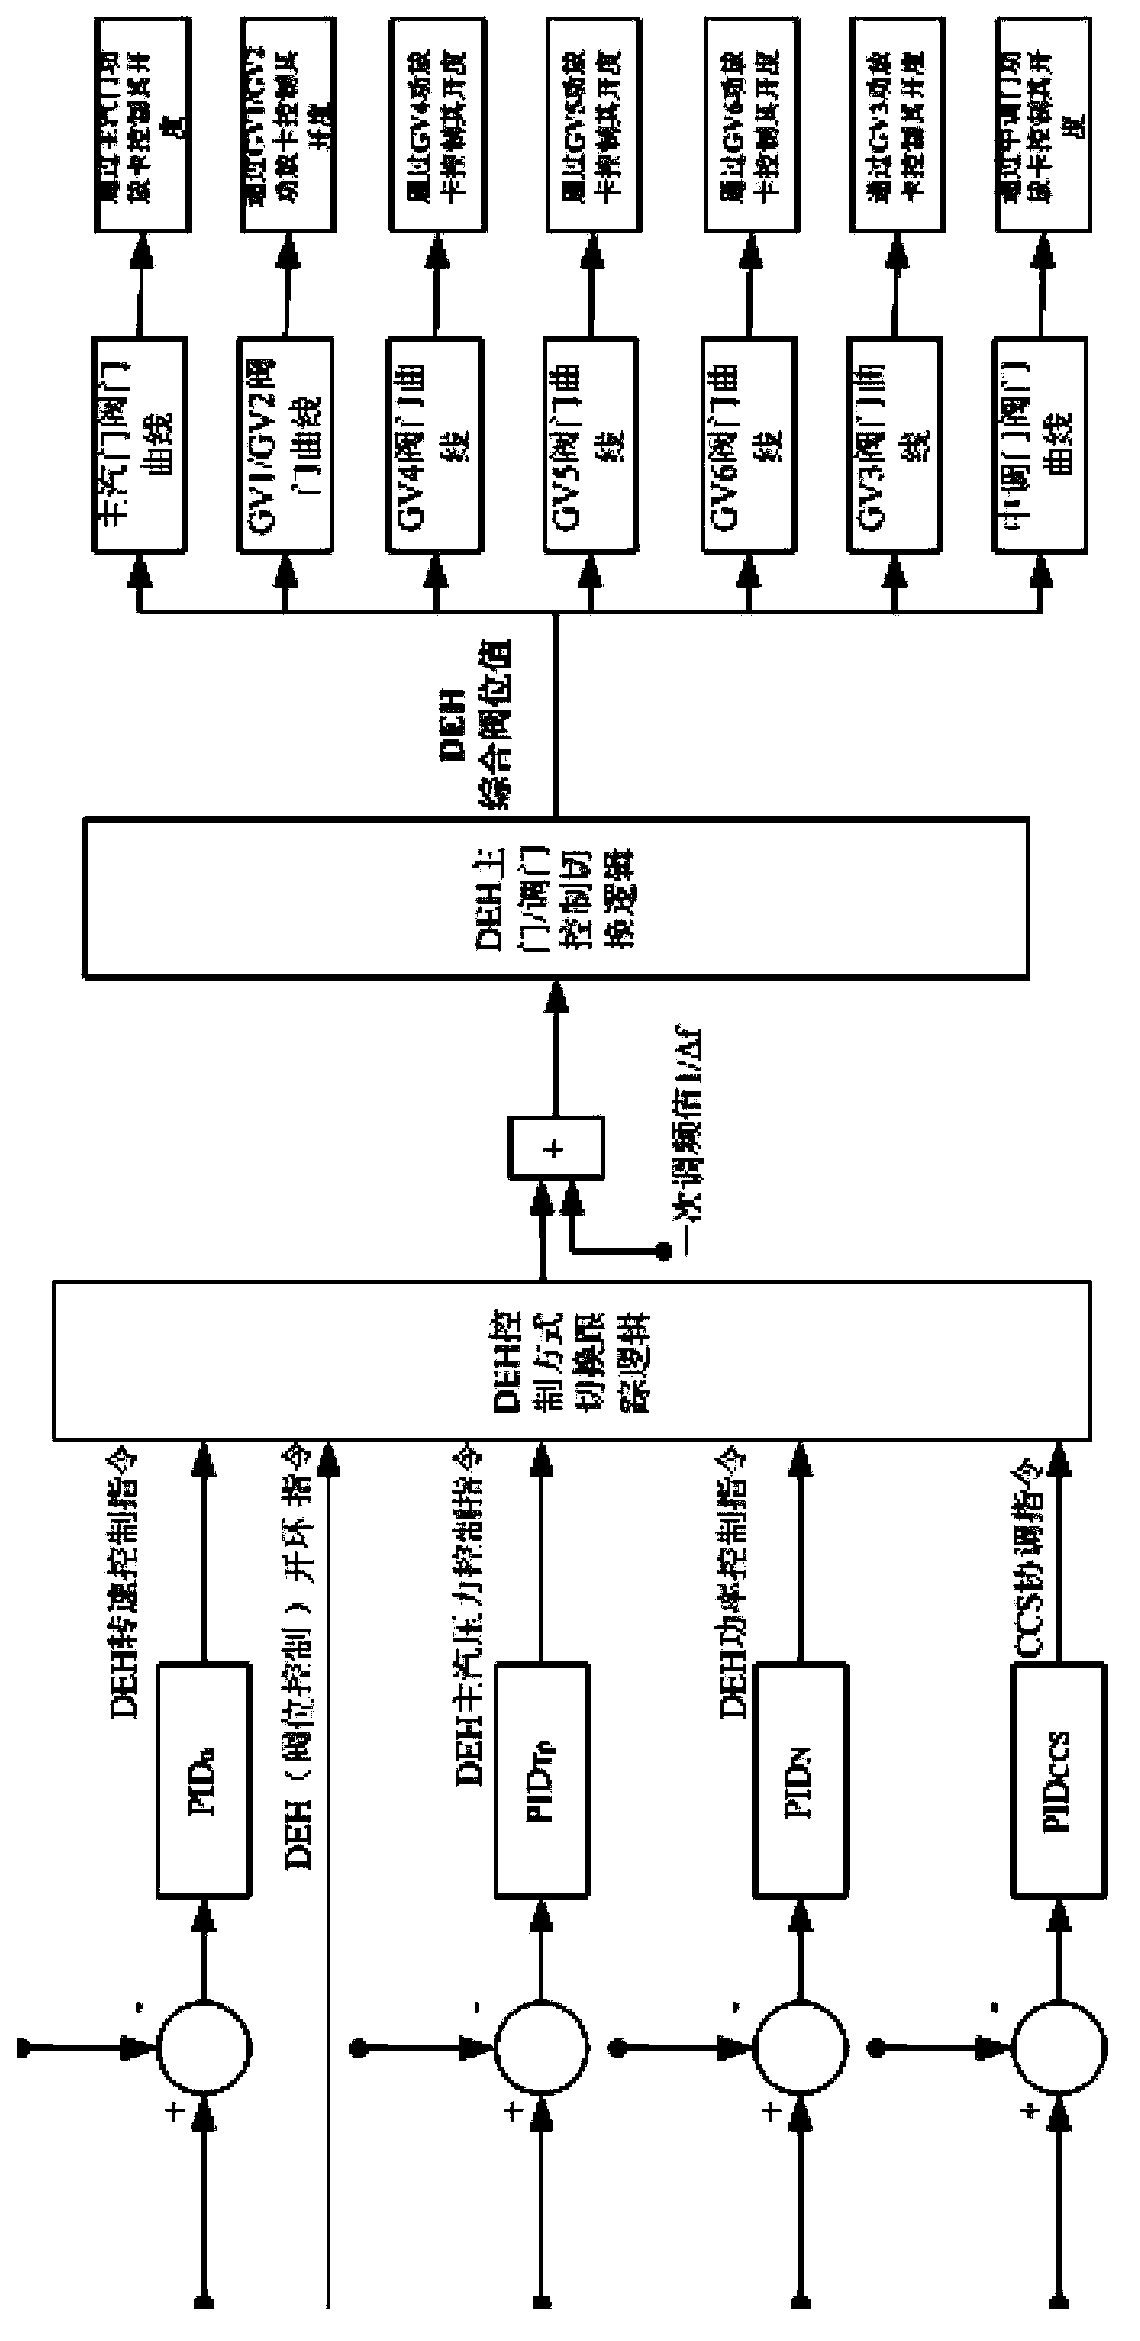 Adjustment method for steam turbine control valve flows in thermal power plant